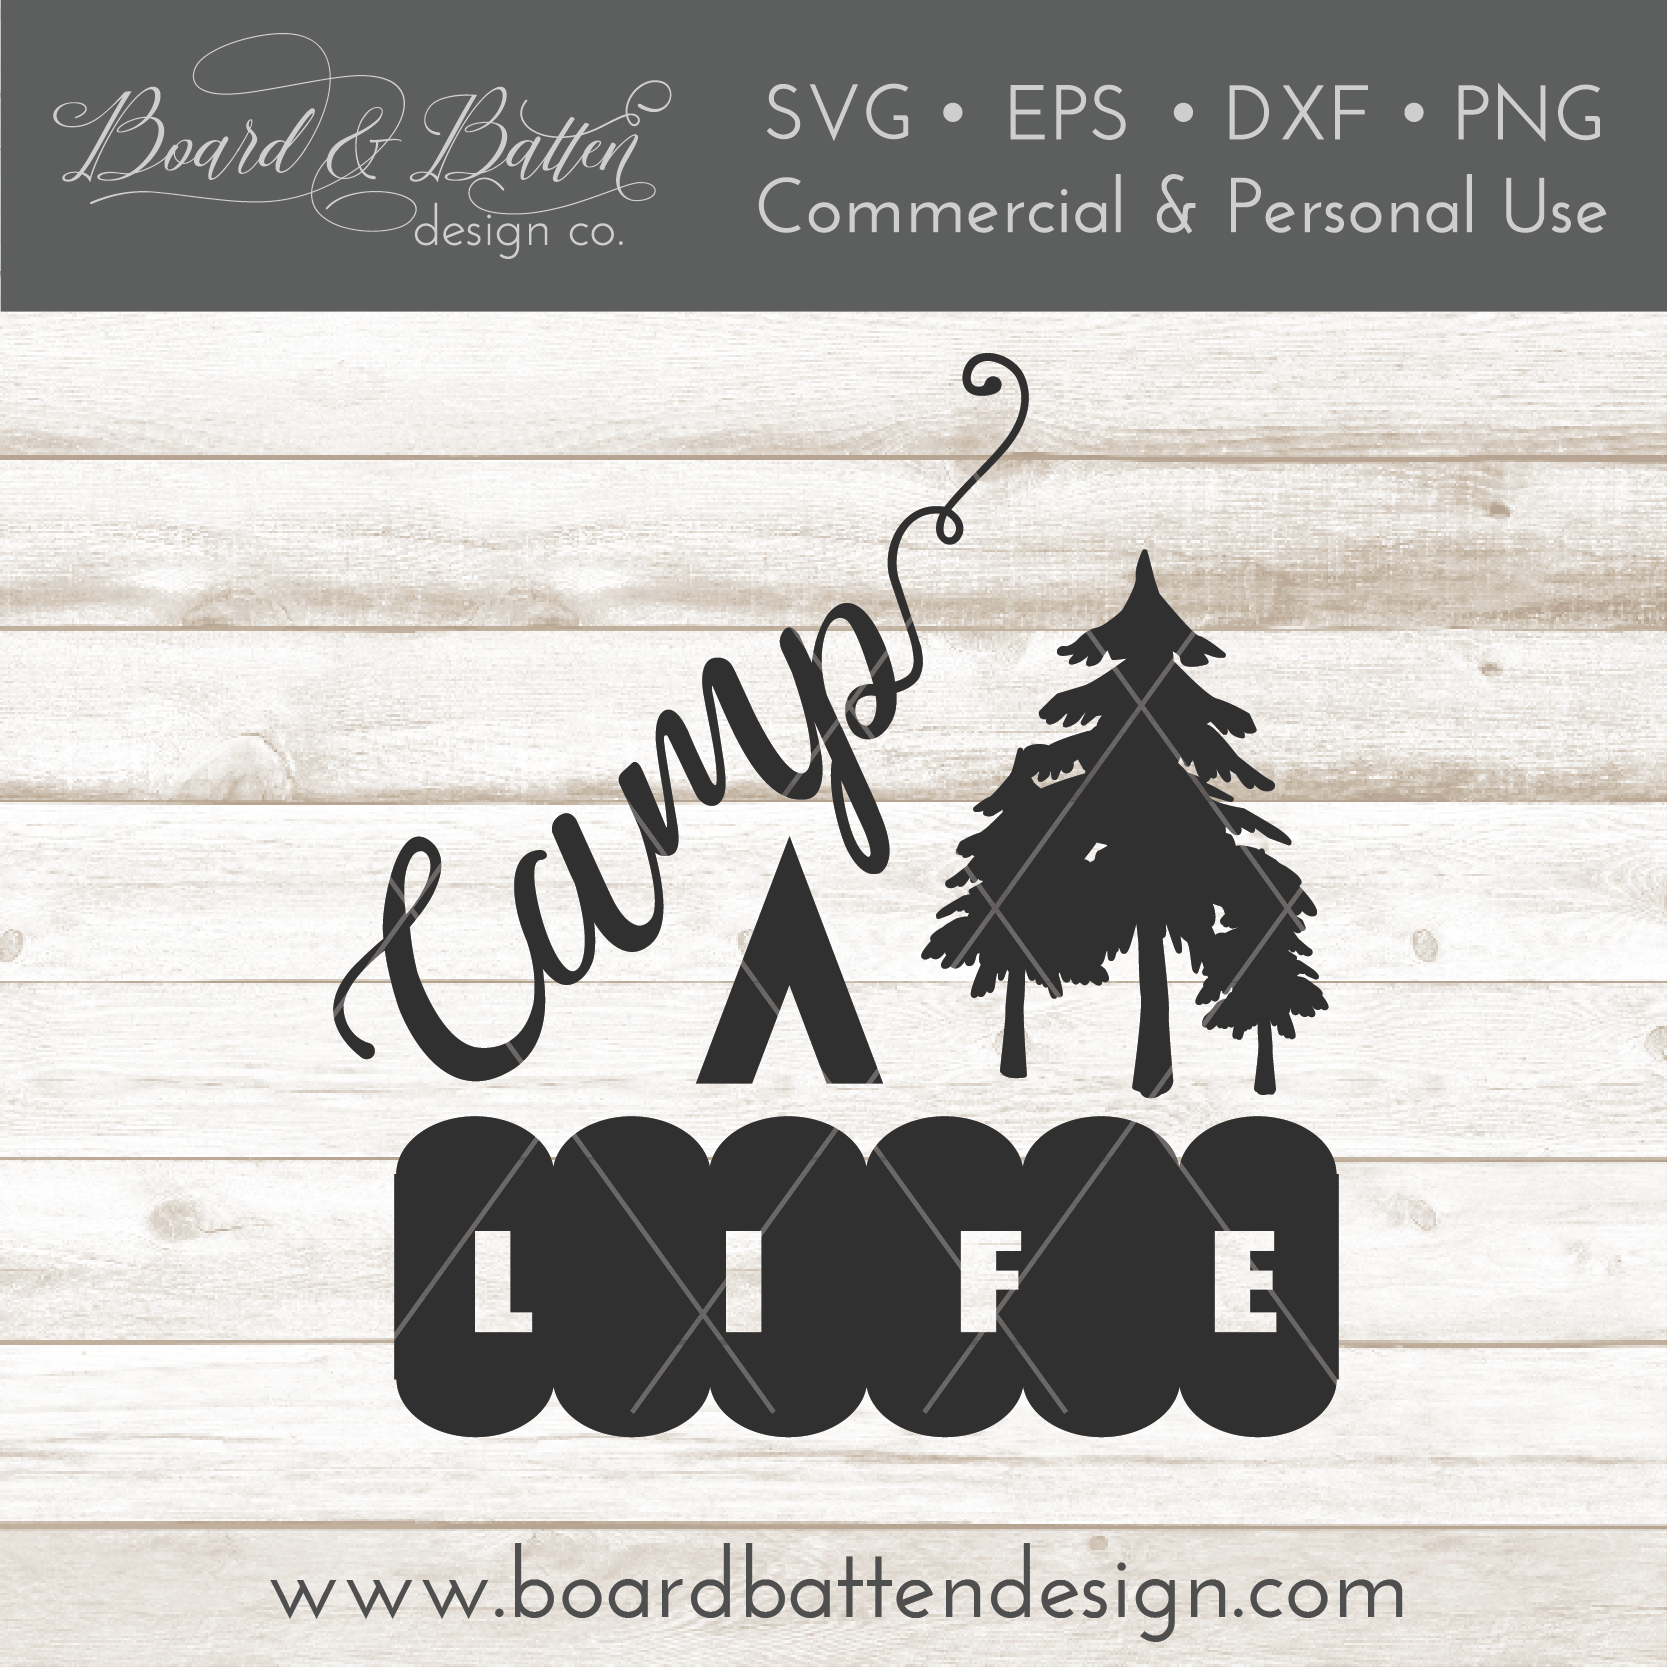 Camp Life SVG File - Style 2 - Commercial Use SVG Files for Cricut & Silhouette